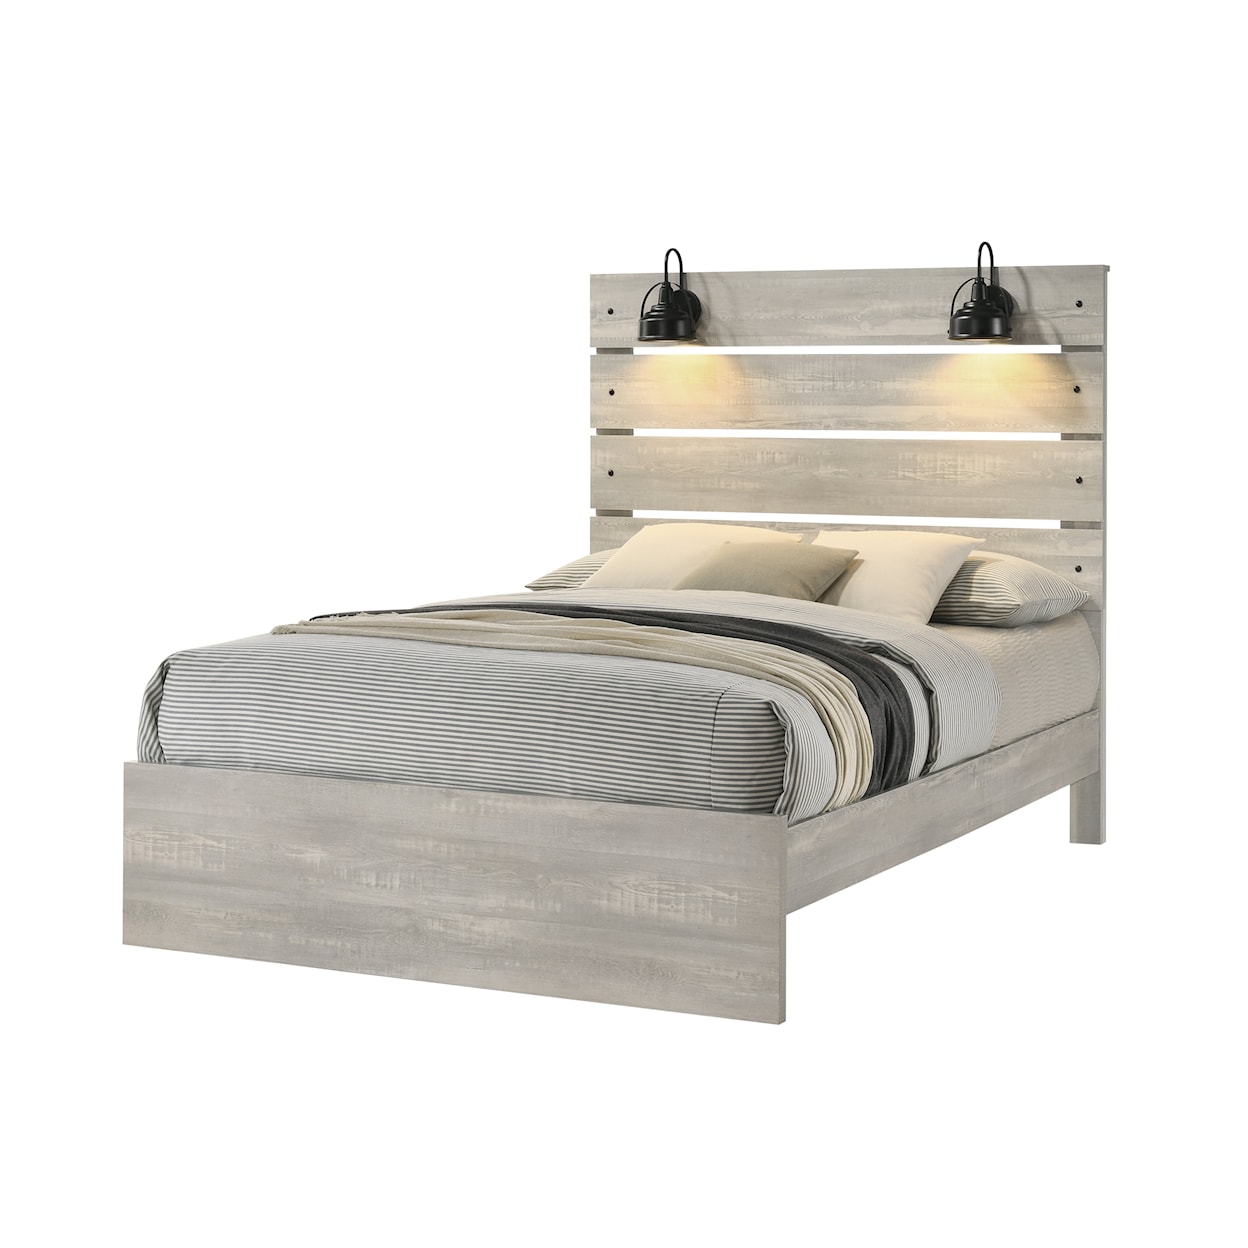 Lifestyle 0300 3 Piece Full Bed